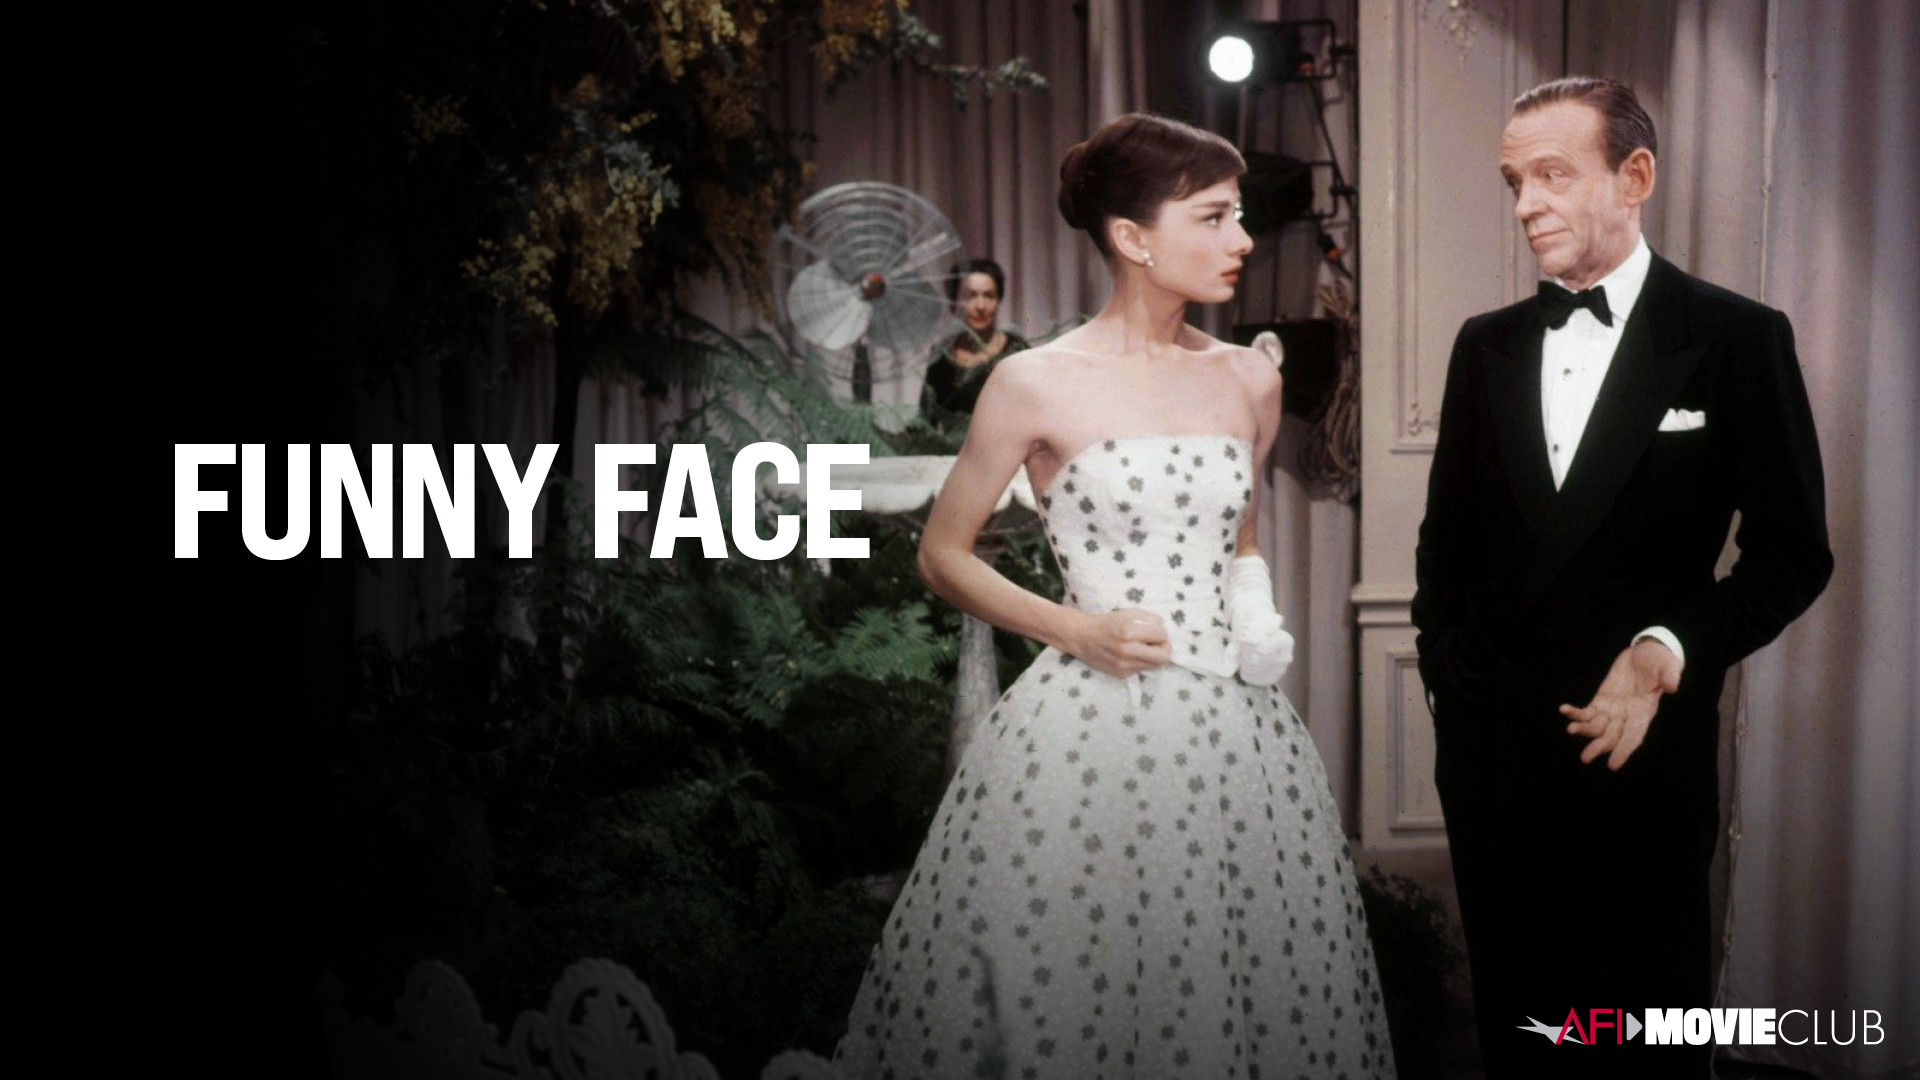 Funny Face Film Still - Audrey Hepburn and Fred Astaire